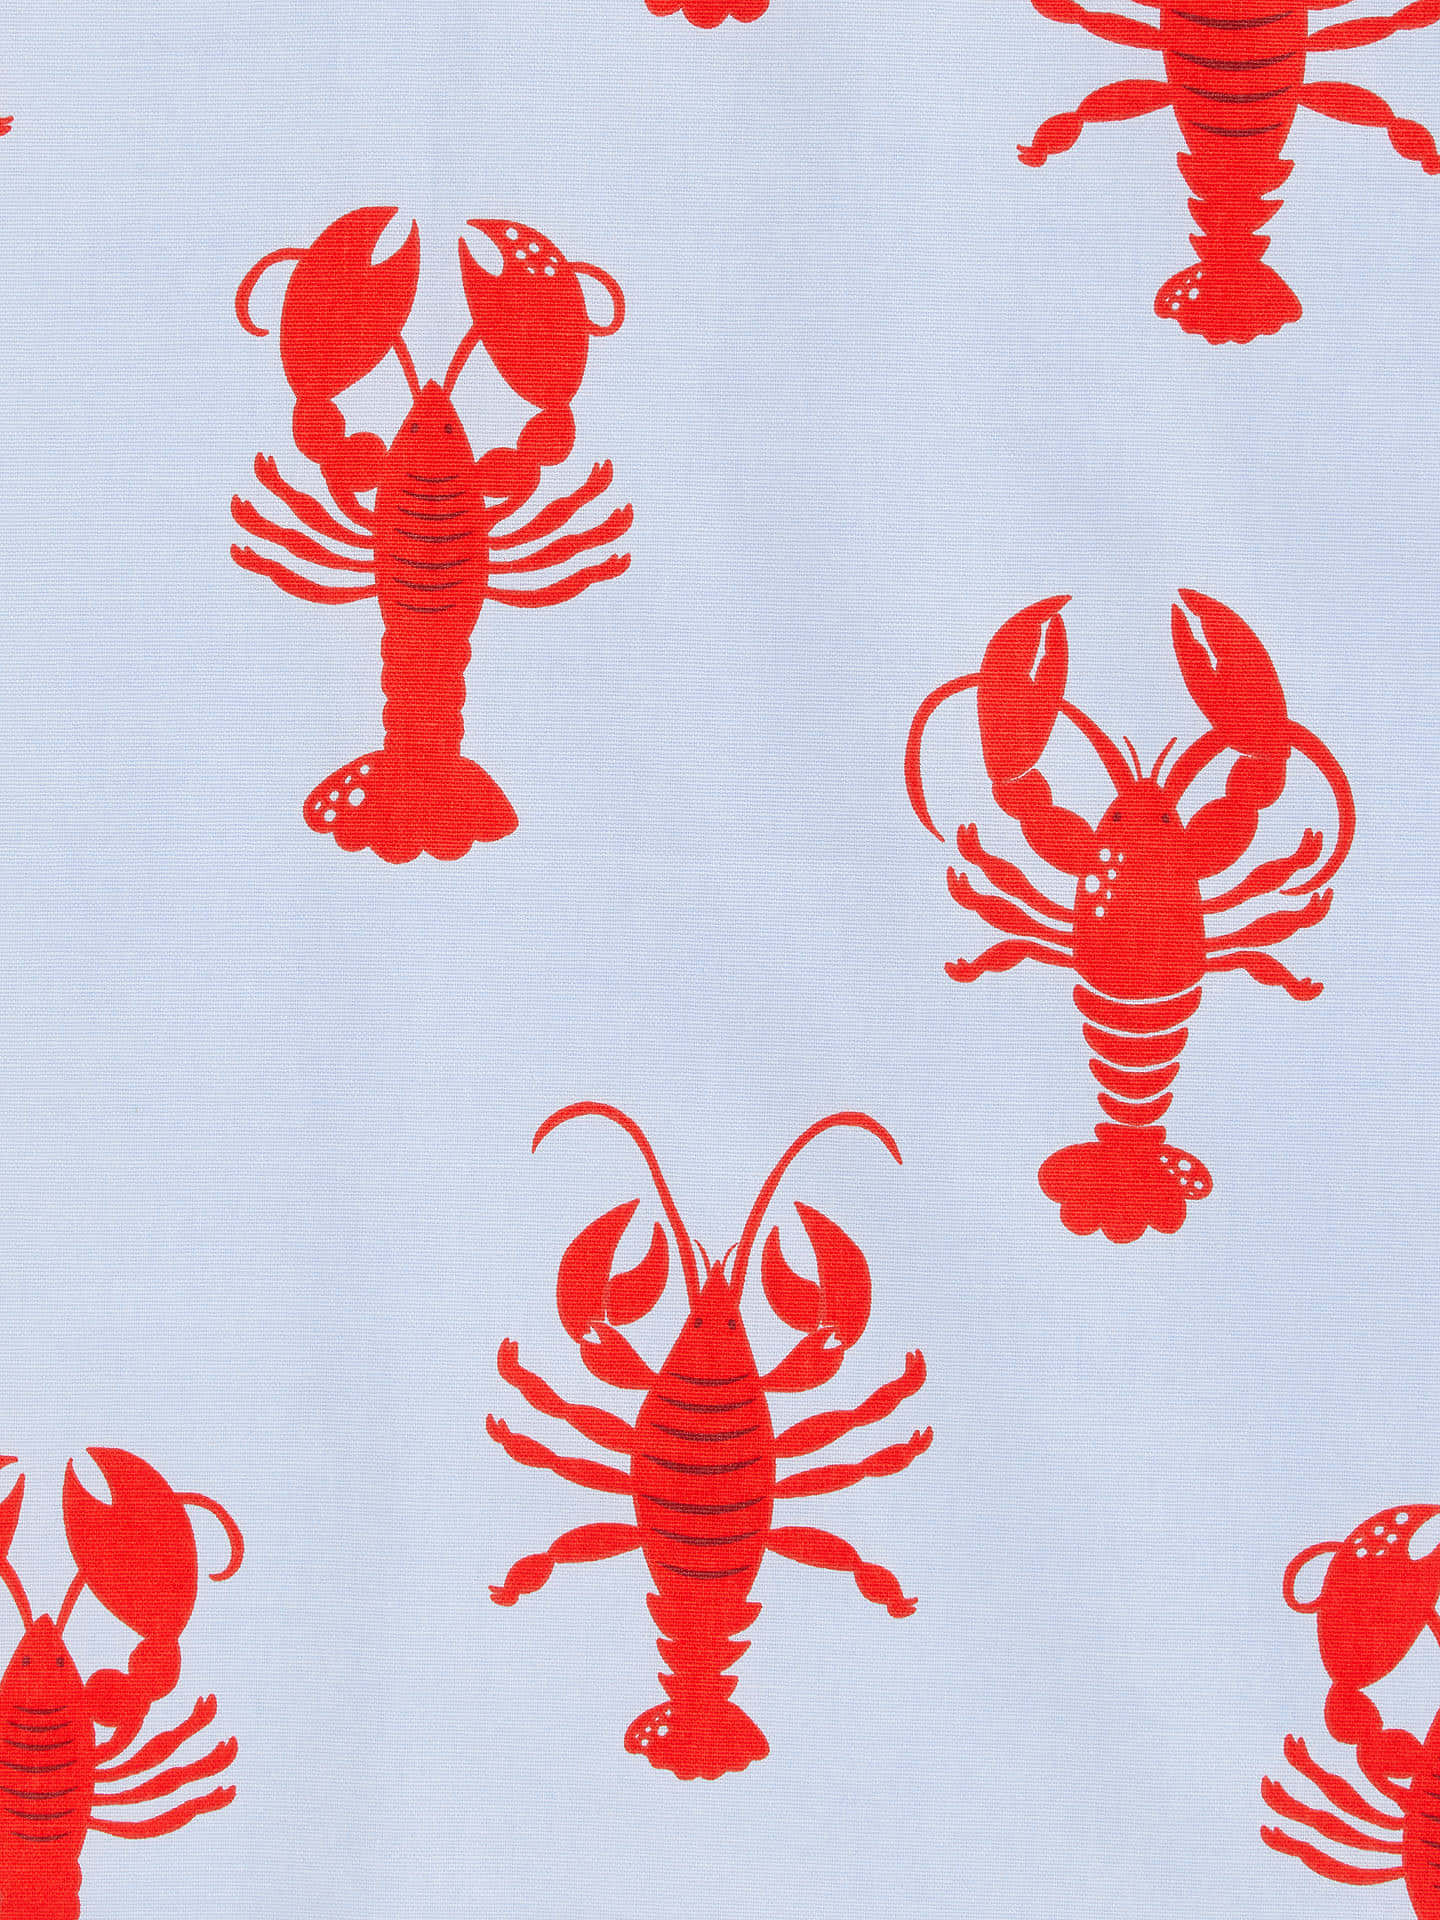 Exuberant Larry The Lobster Showing Off His Muscles Wallpaper